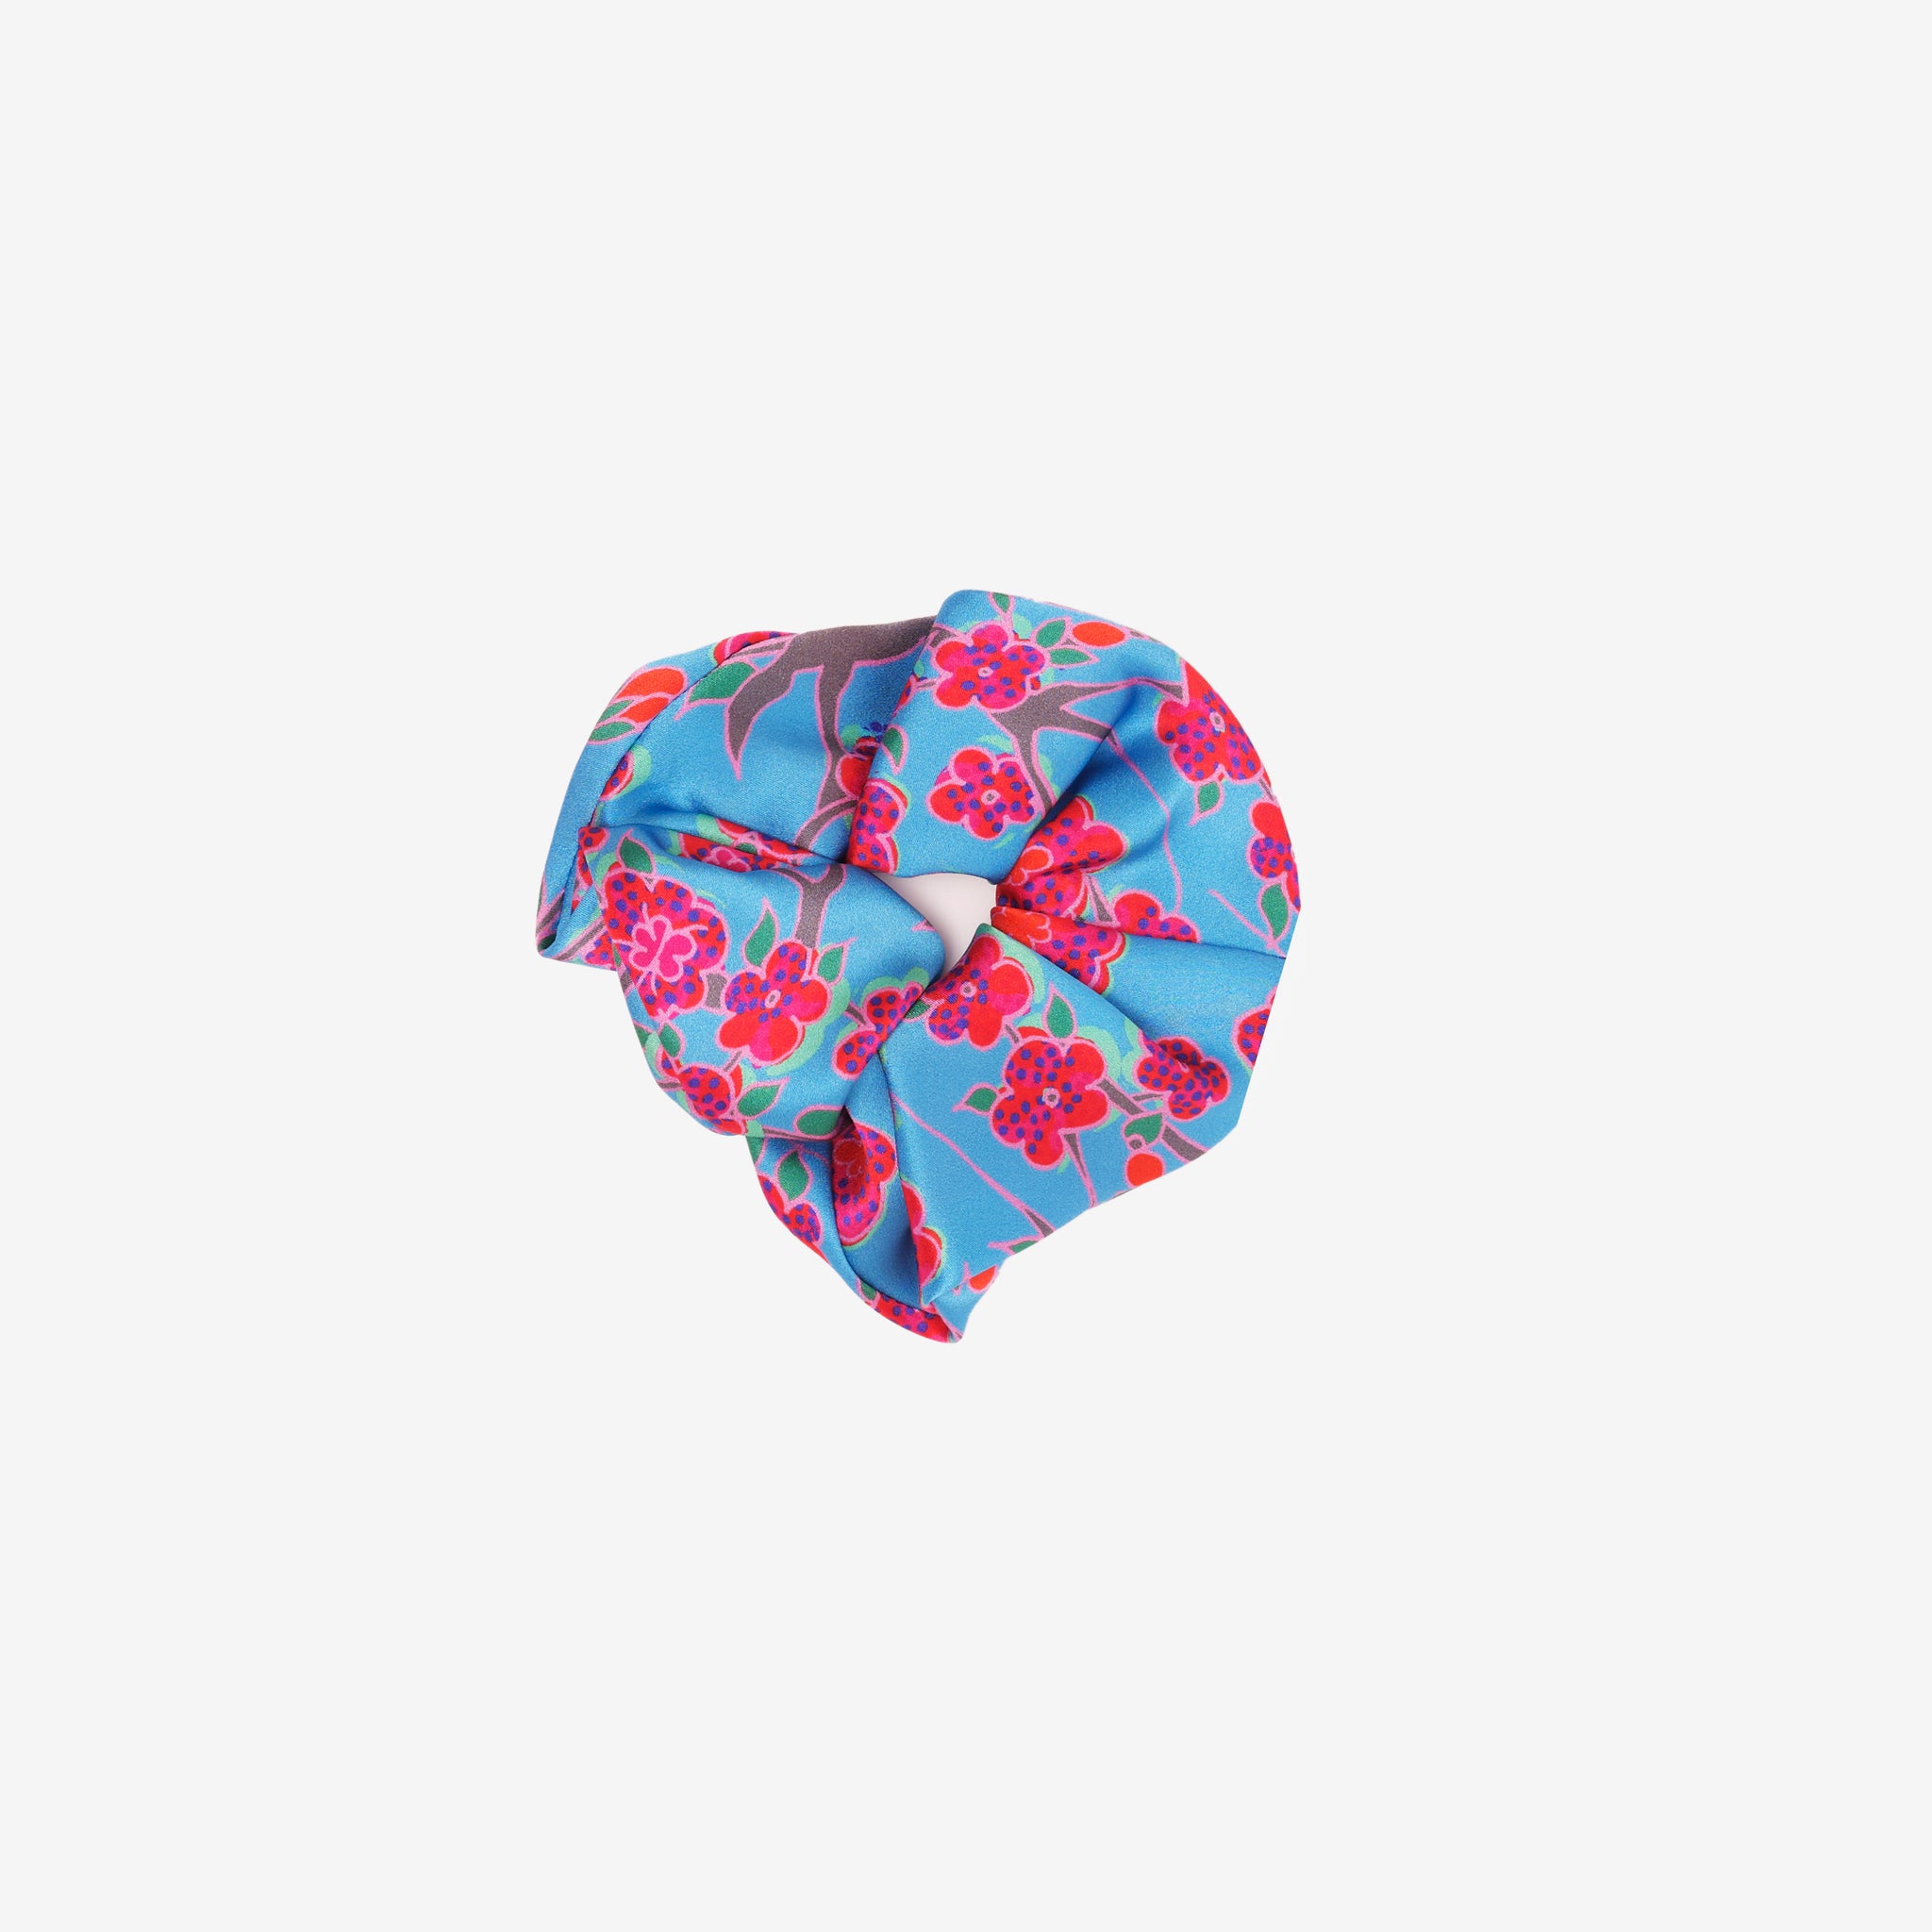 Crimson Rose scrunchie featuring hand drawn flower print from the Island Dreams collection in blue, red, pink, grey and green.